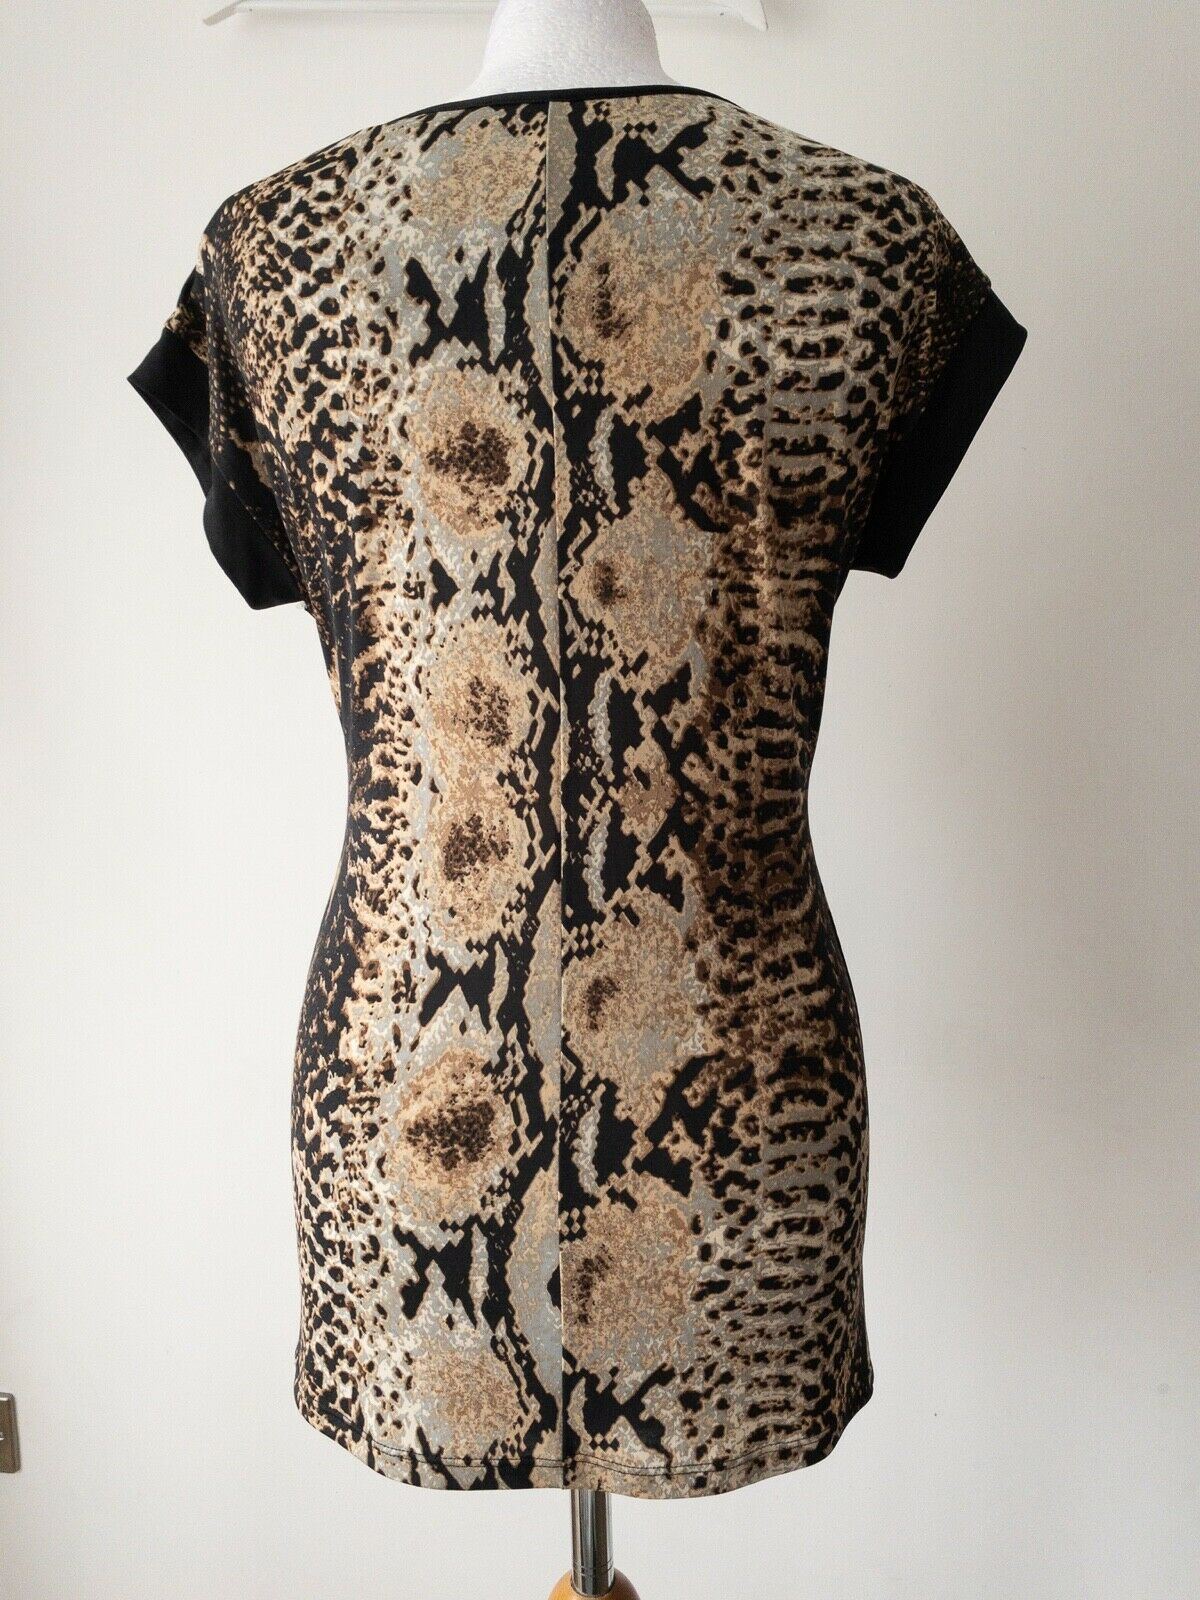 George Animal Print Top Ruched Size 10 / 12